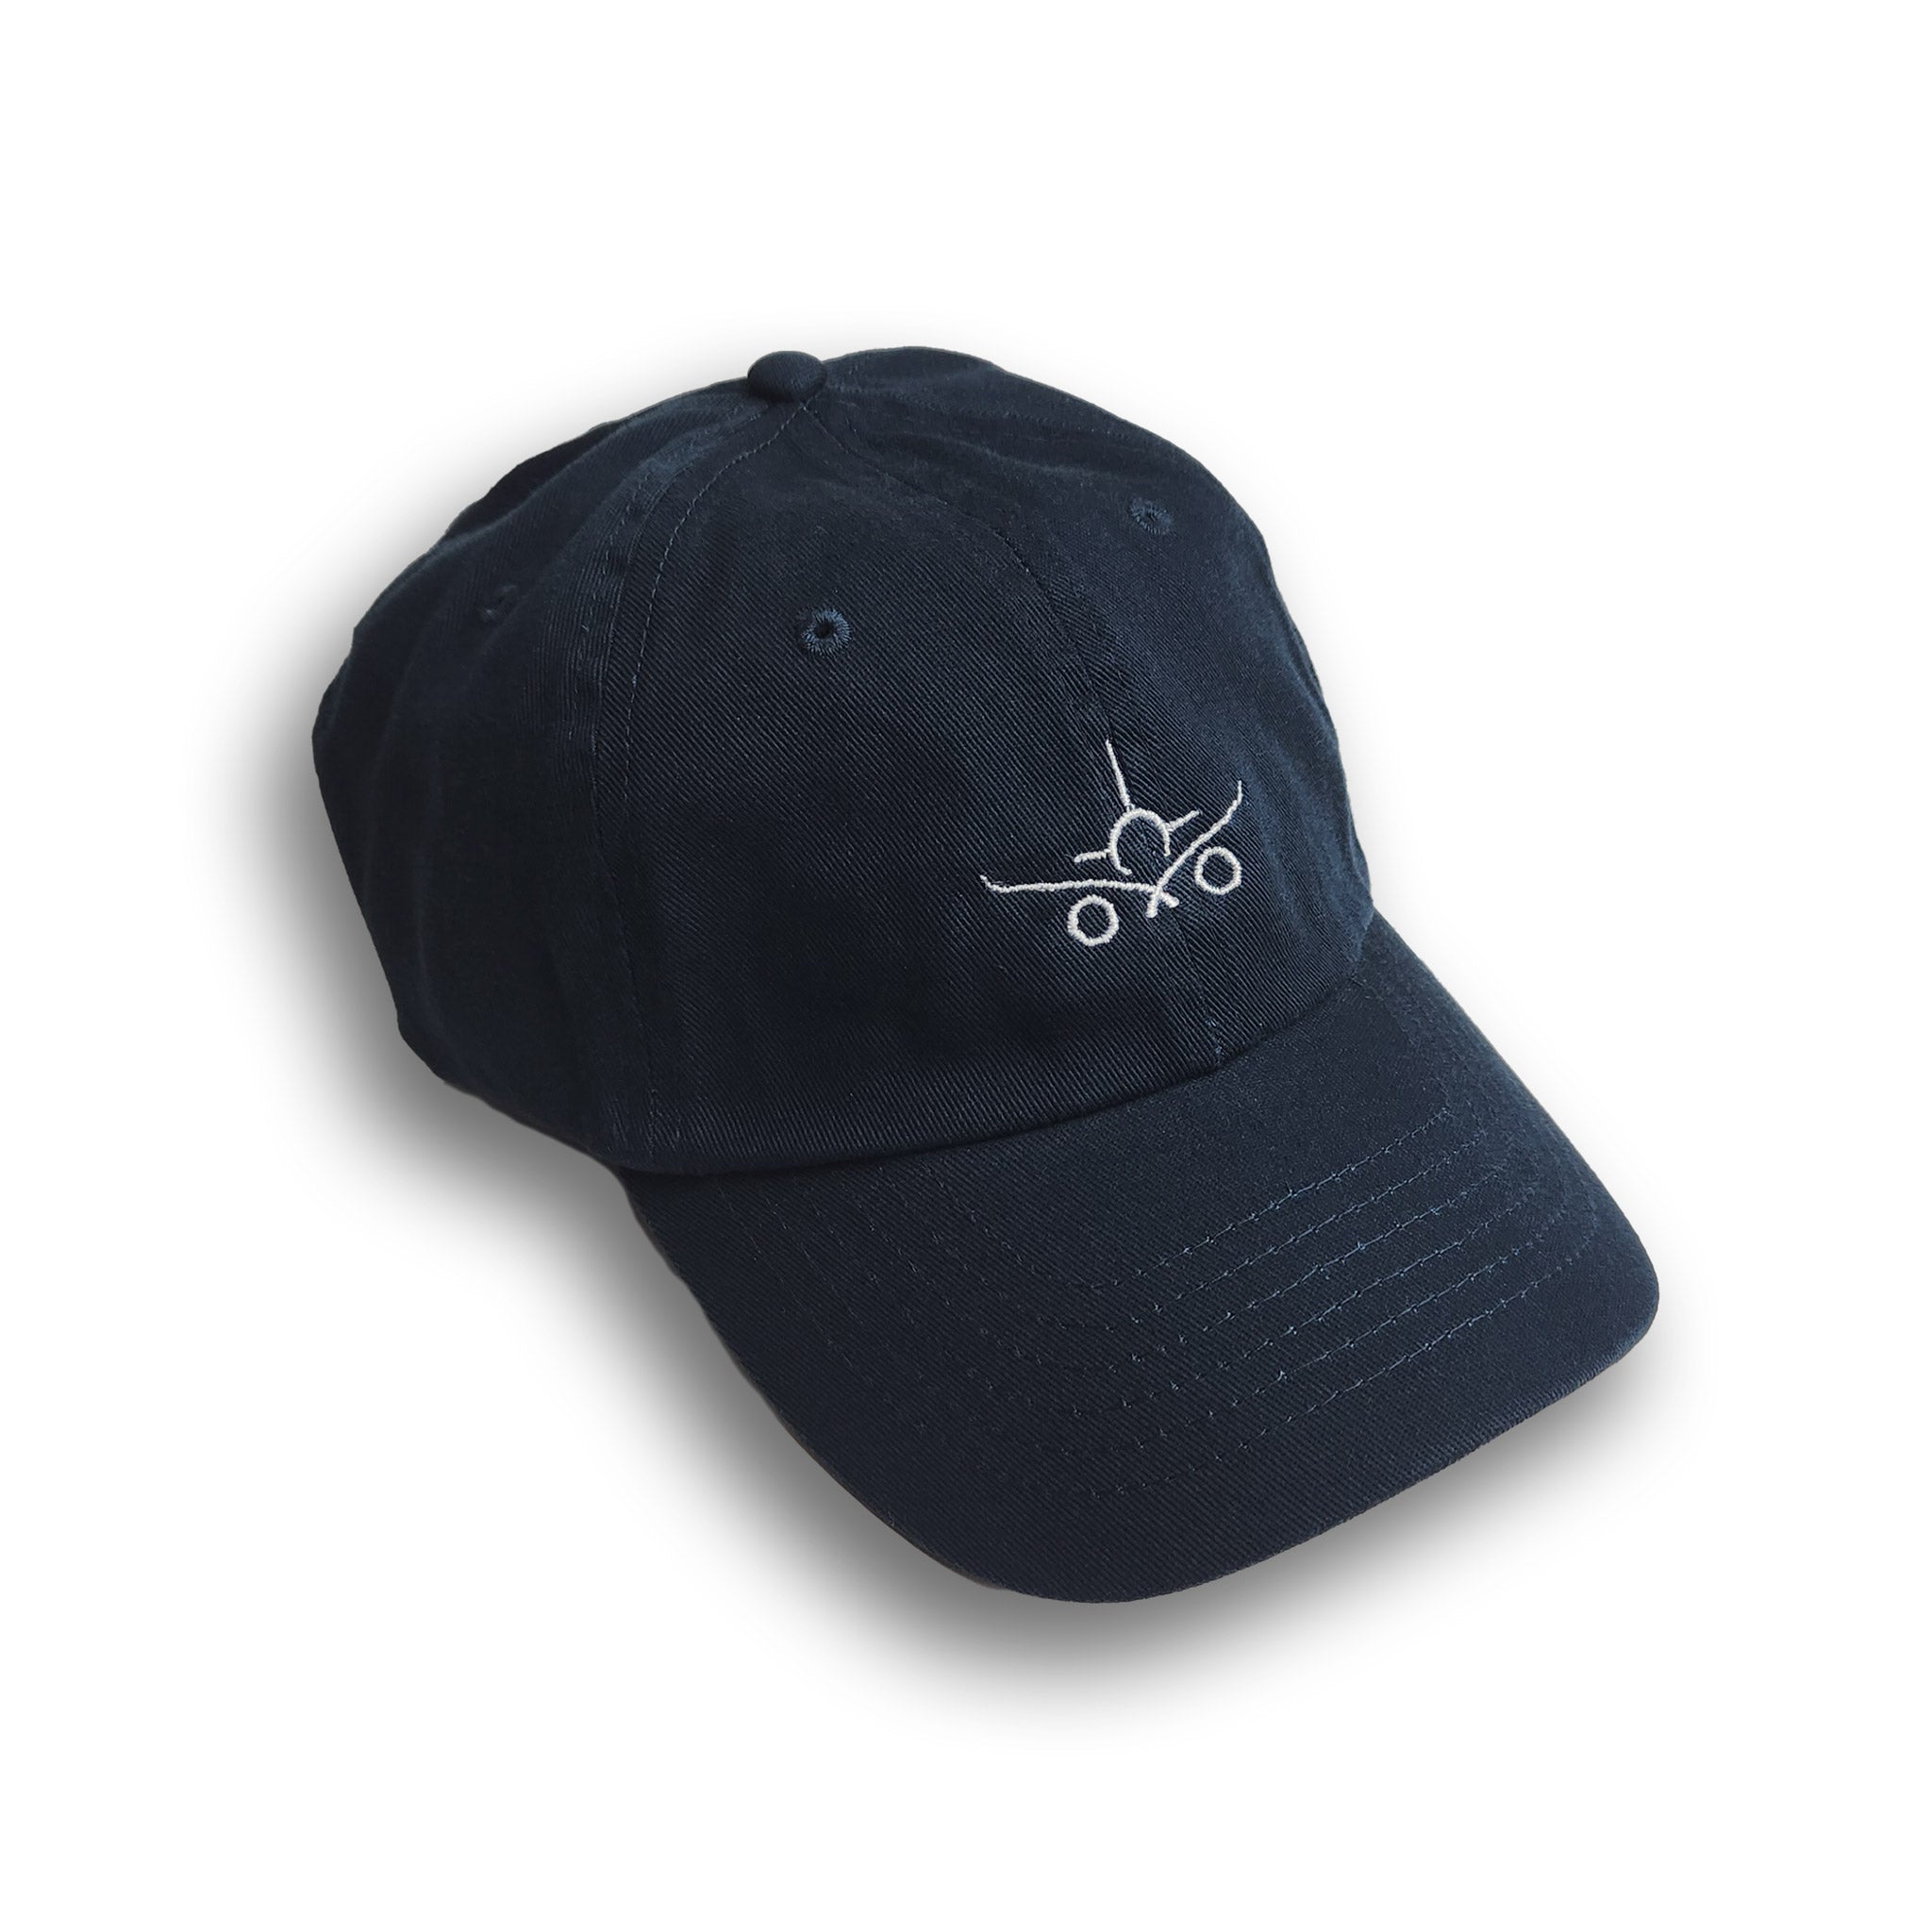 "Captain" - Unstructured Navy Blue Aviation Dad Cap w/ White Embroidered Logo